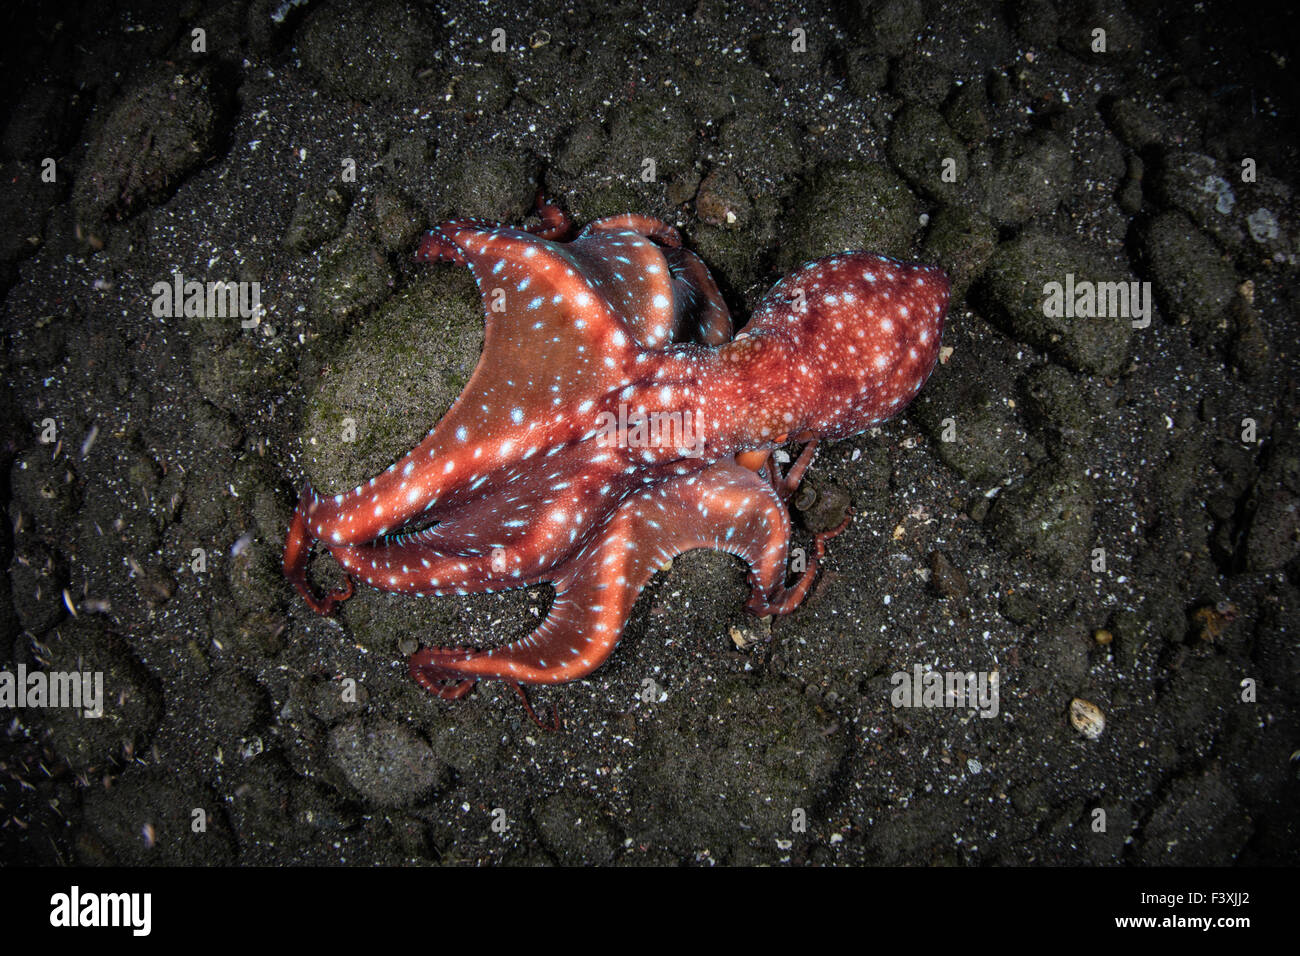 A rare Starry Night octopus (Octopus luteus) hunts for prey at night on a rocky reef in Komodo National Park, Indonesia. Stock Photo